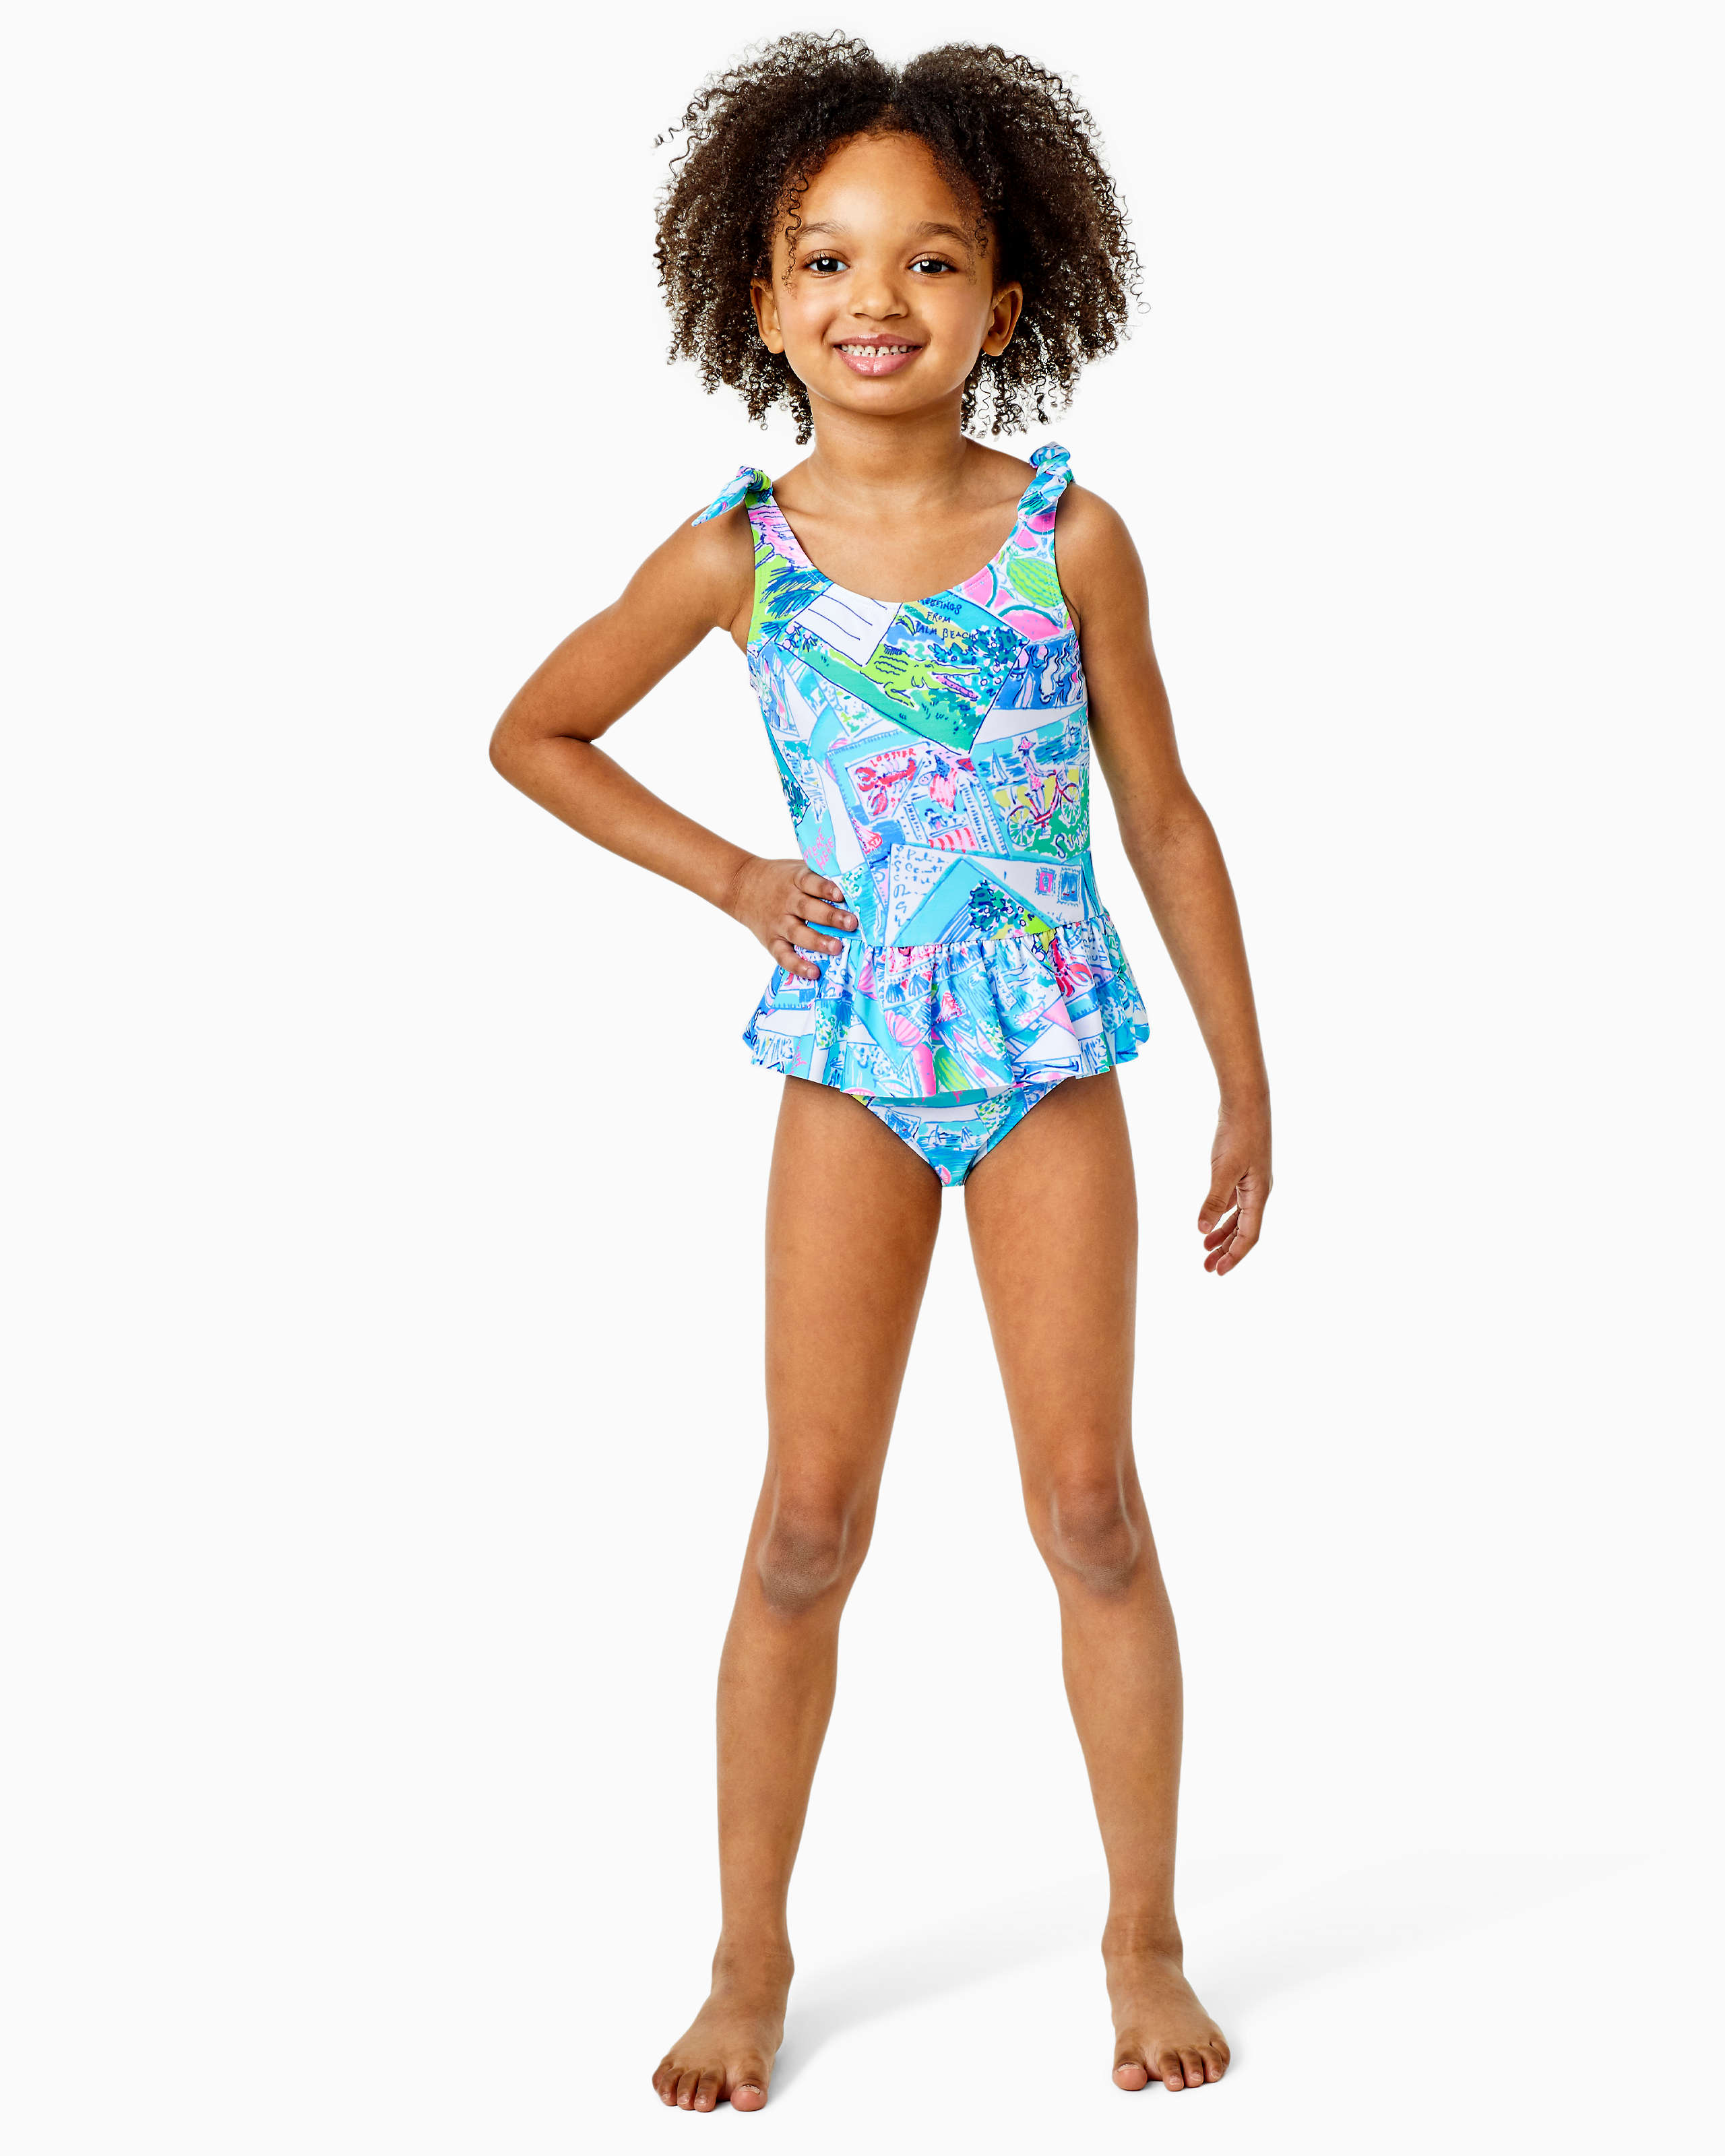 UPF 50+ Girls Vossie Swimsuit, Multi Wish You Were Here Kids, large - Lilly Pulitzer Zoomed